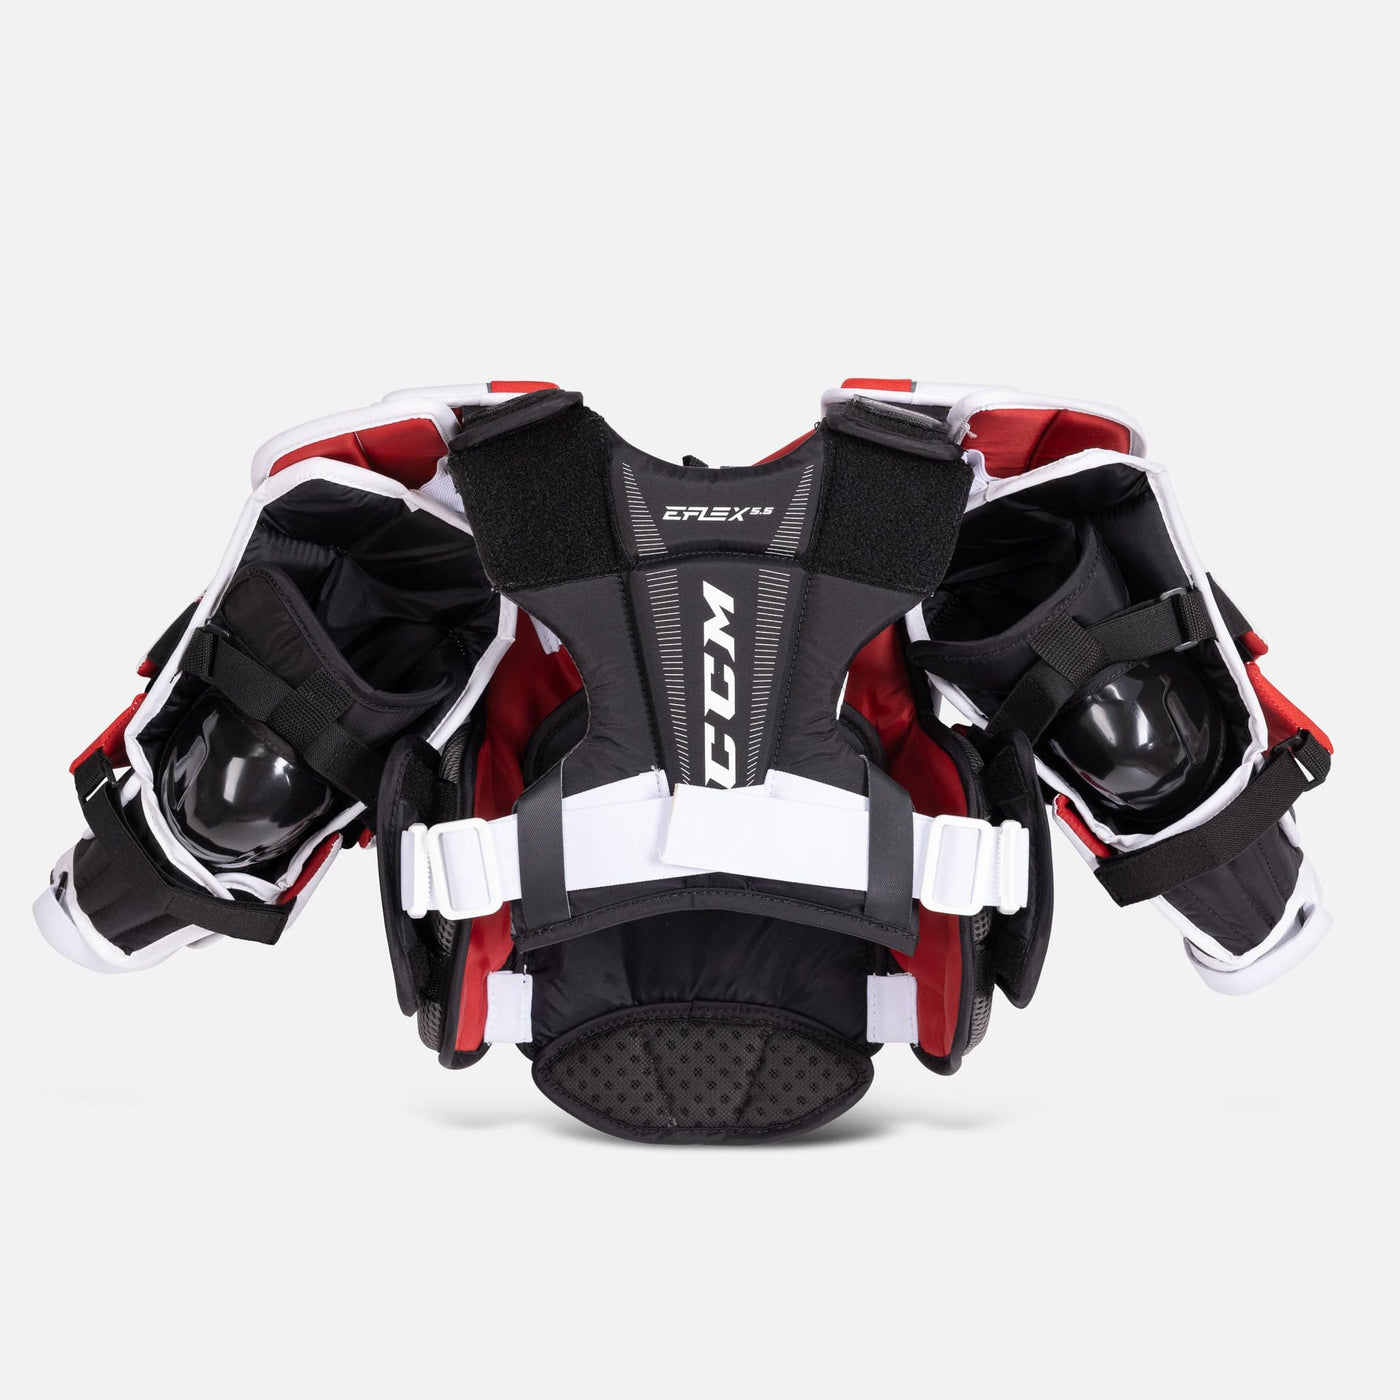 CCM Extreme Flex E5.5 Youth Chest & Arm Protector